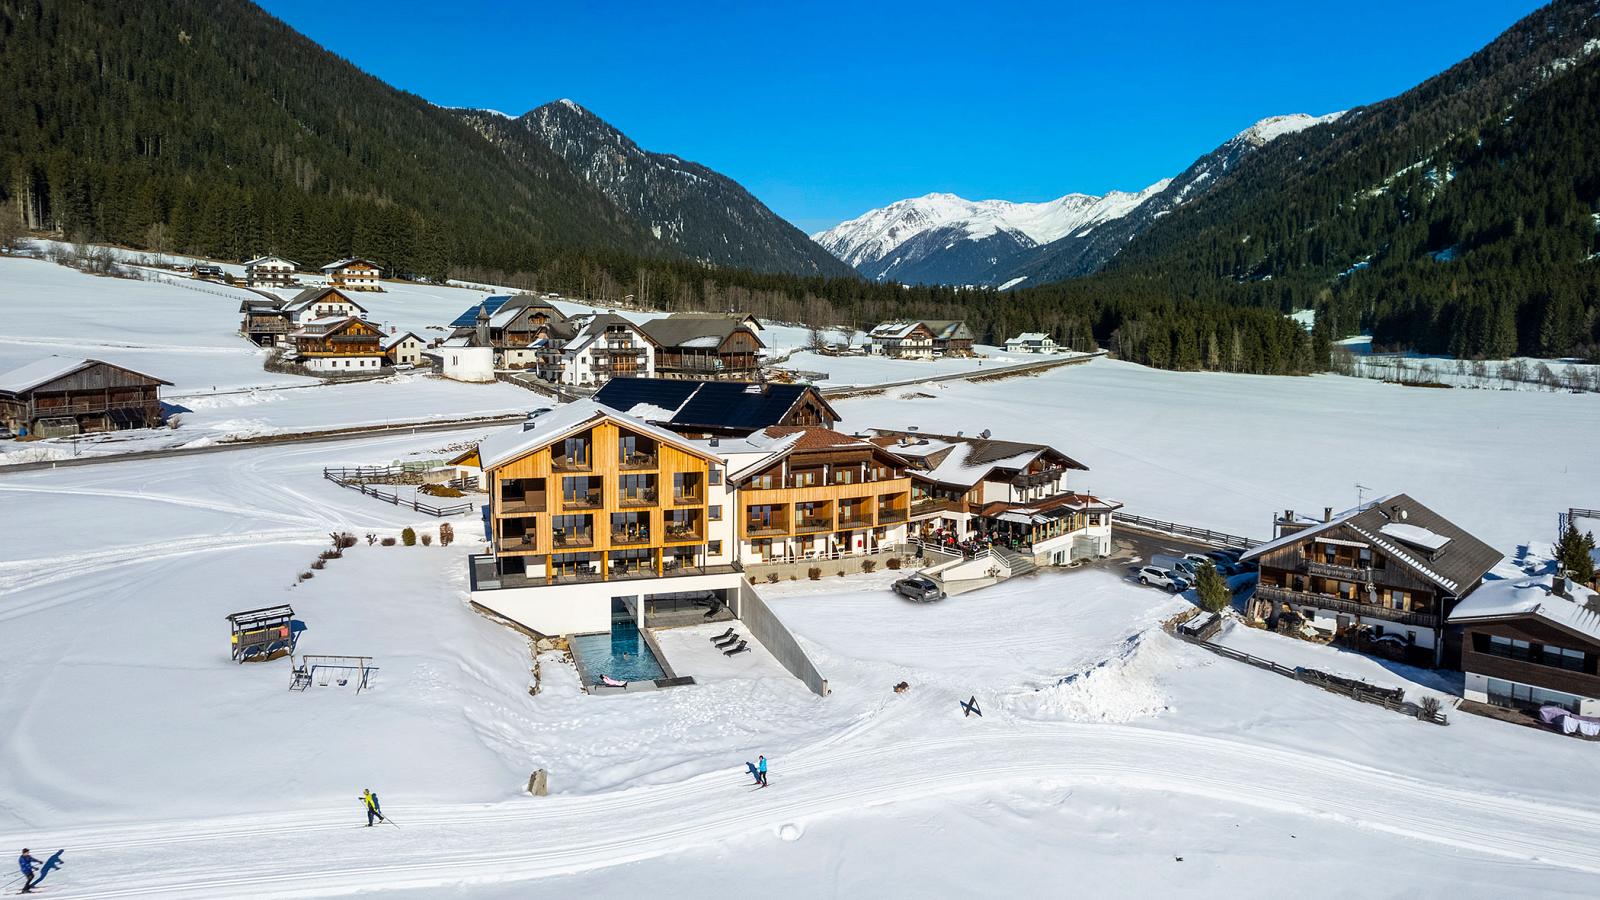 the Hotel Tyrol in snow-covered Gsies in winter